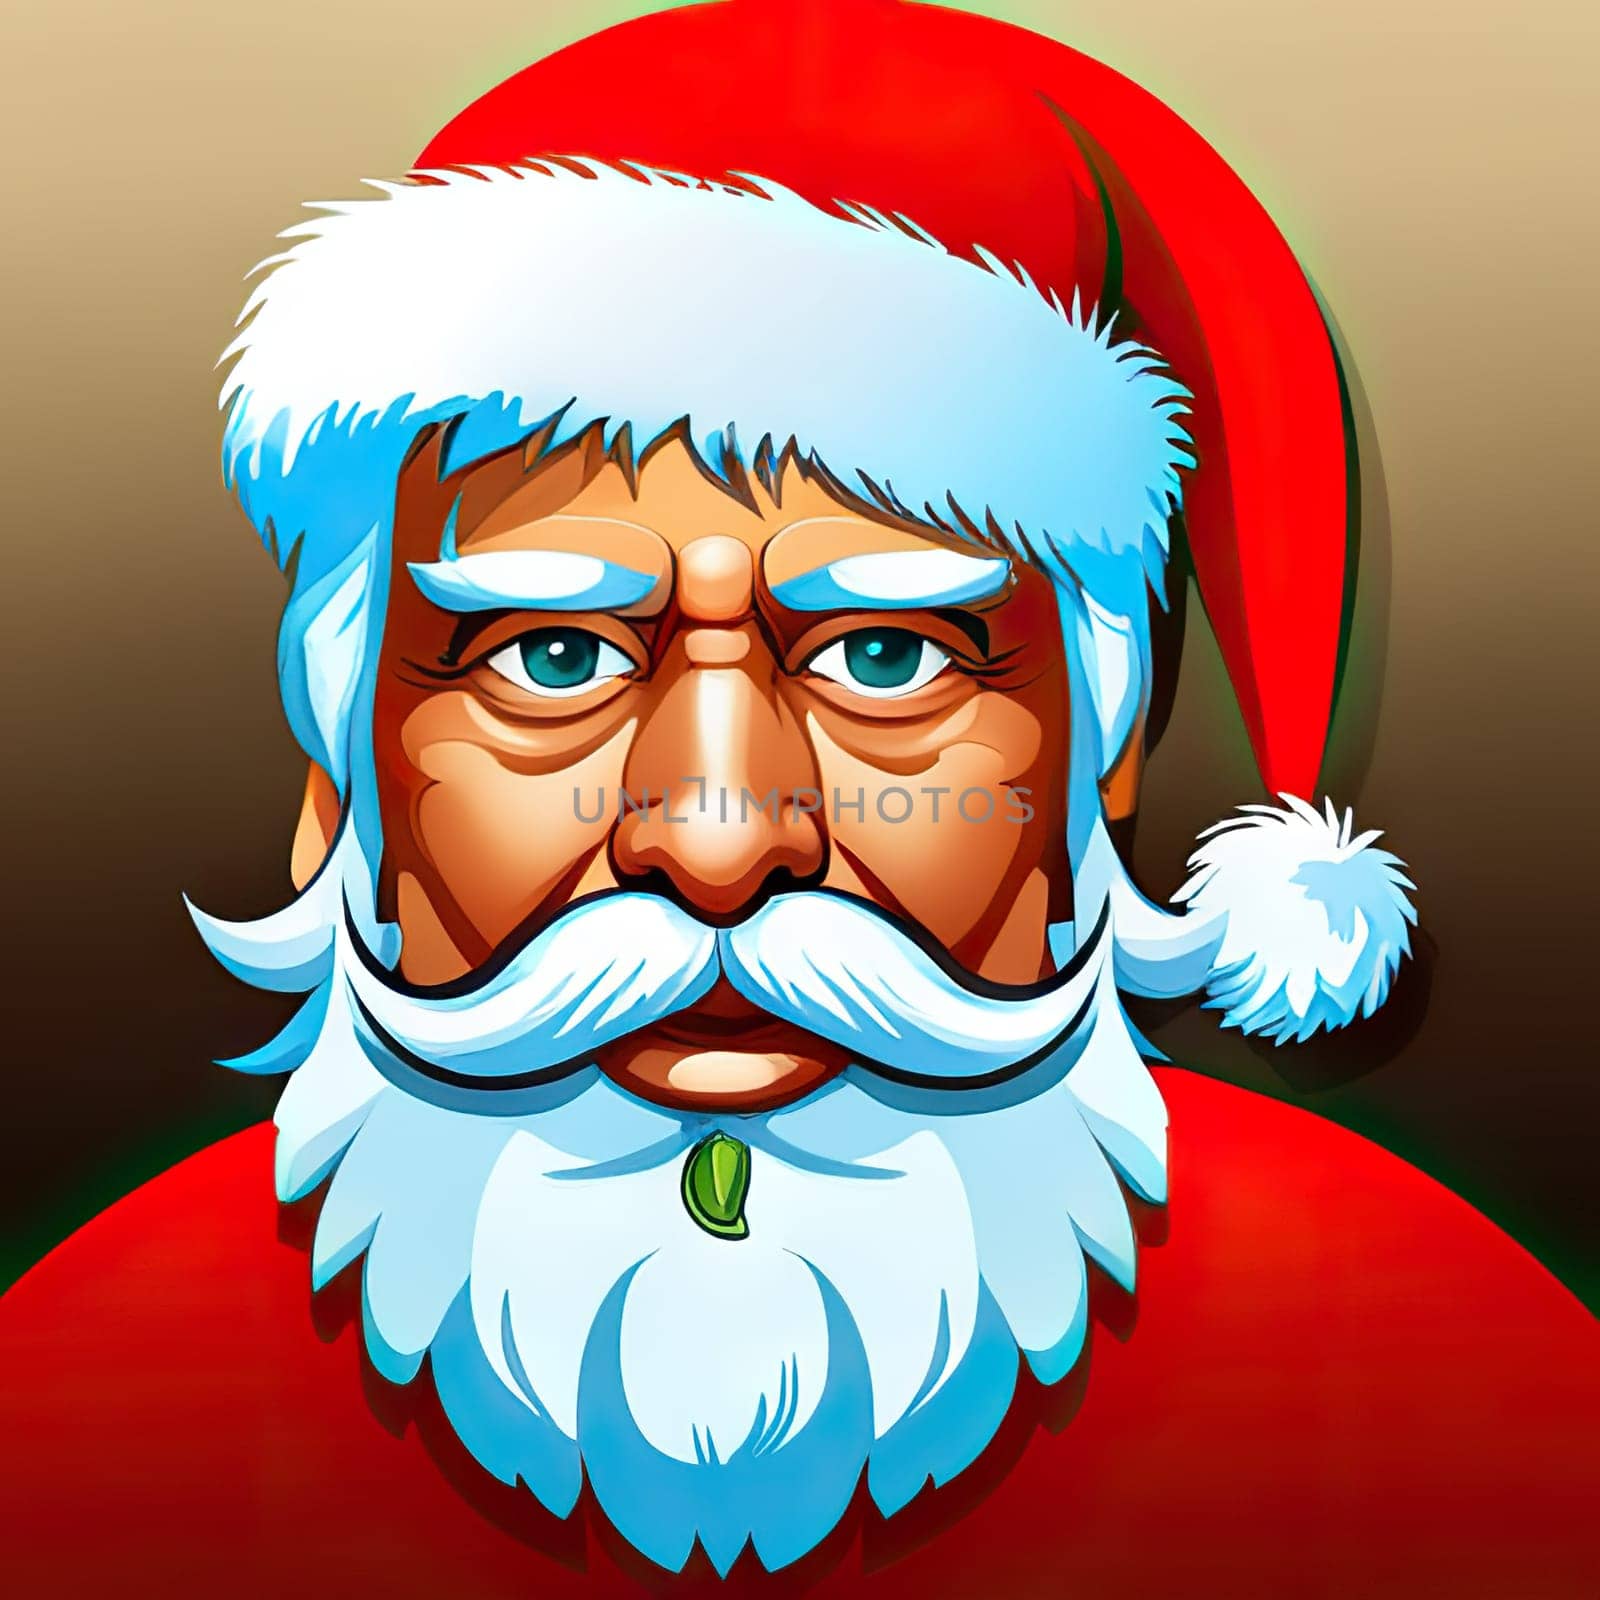 Cartoon Christmas illustration Funny happy Santa Claus character with gift, bag with presents. For Christmas cards, banners, tags and labels.